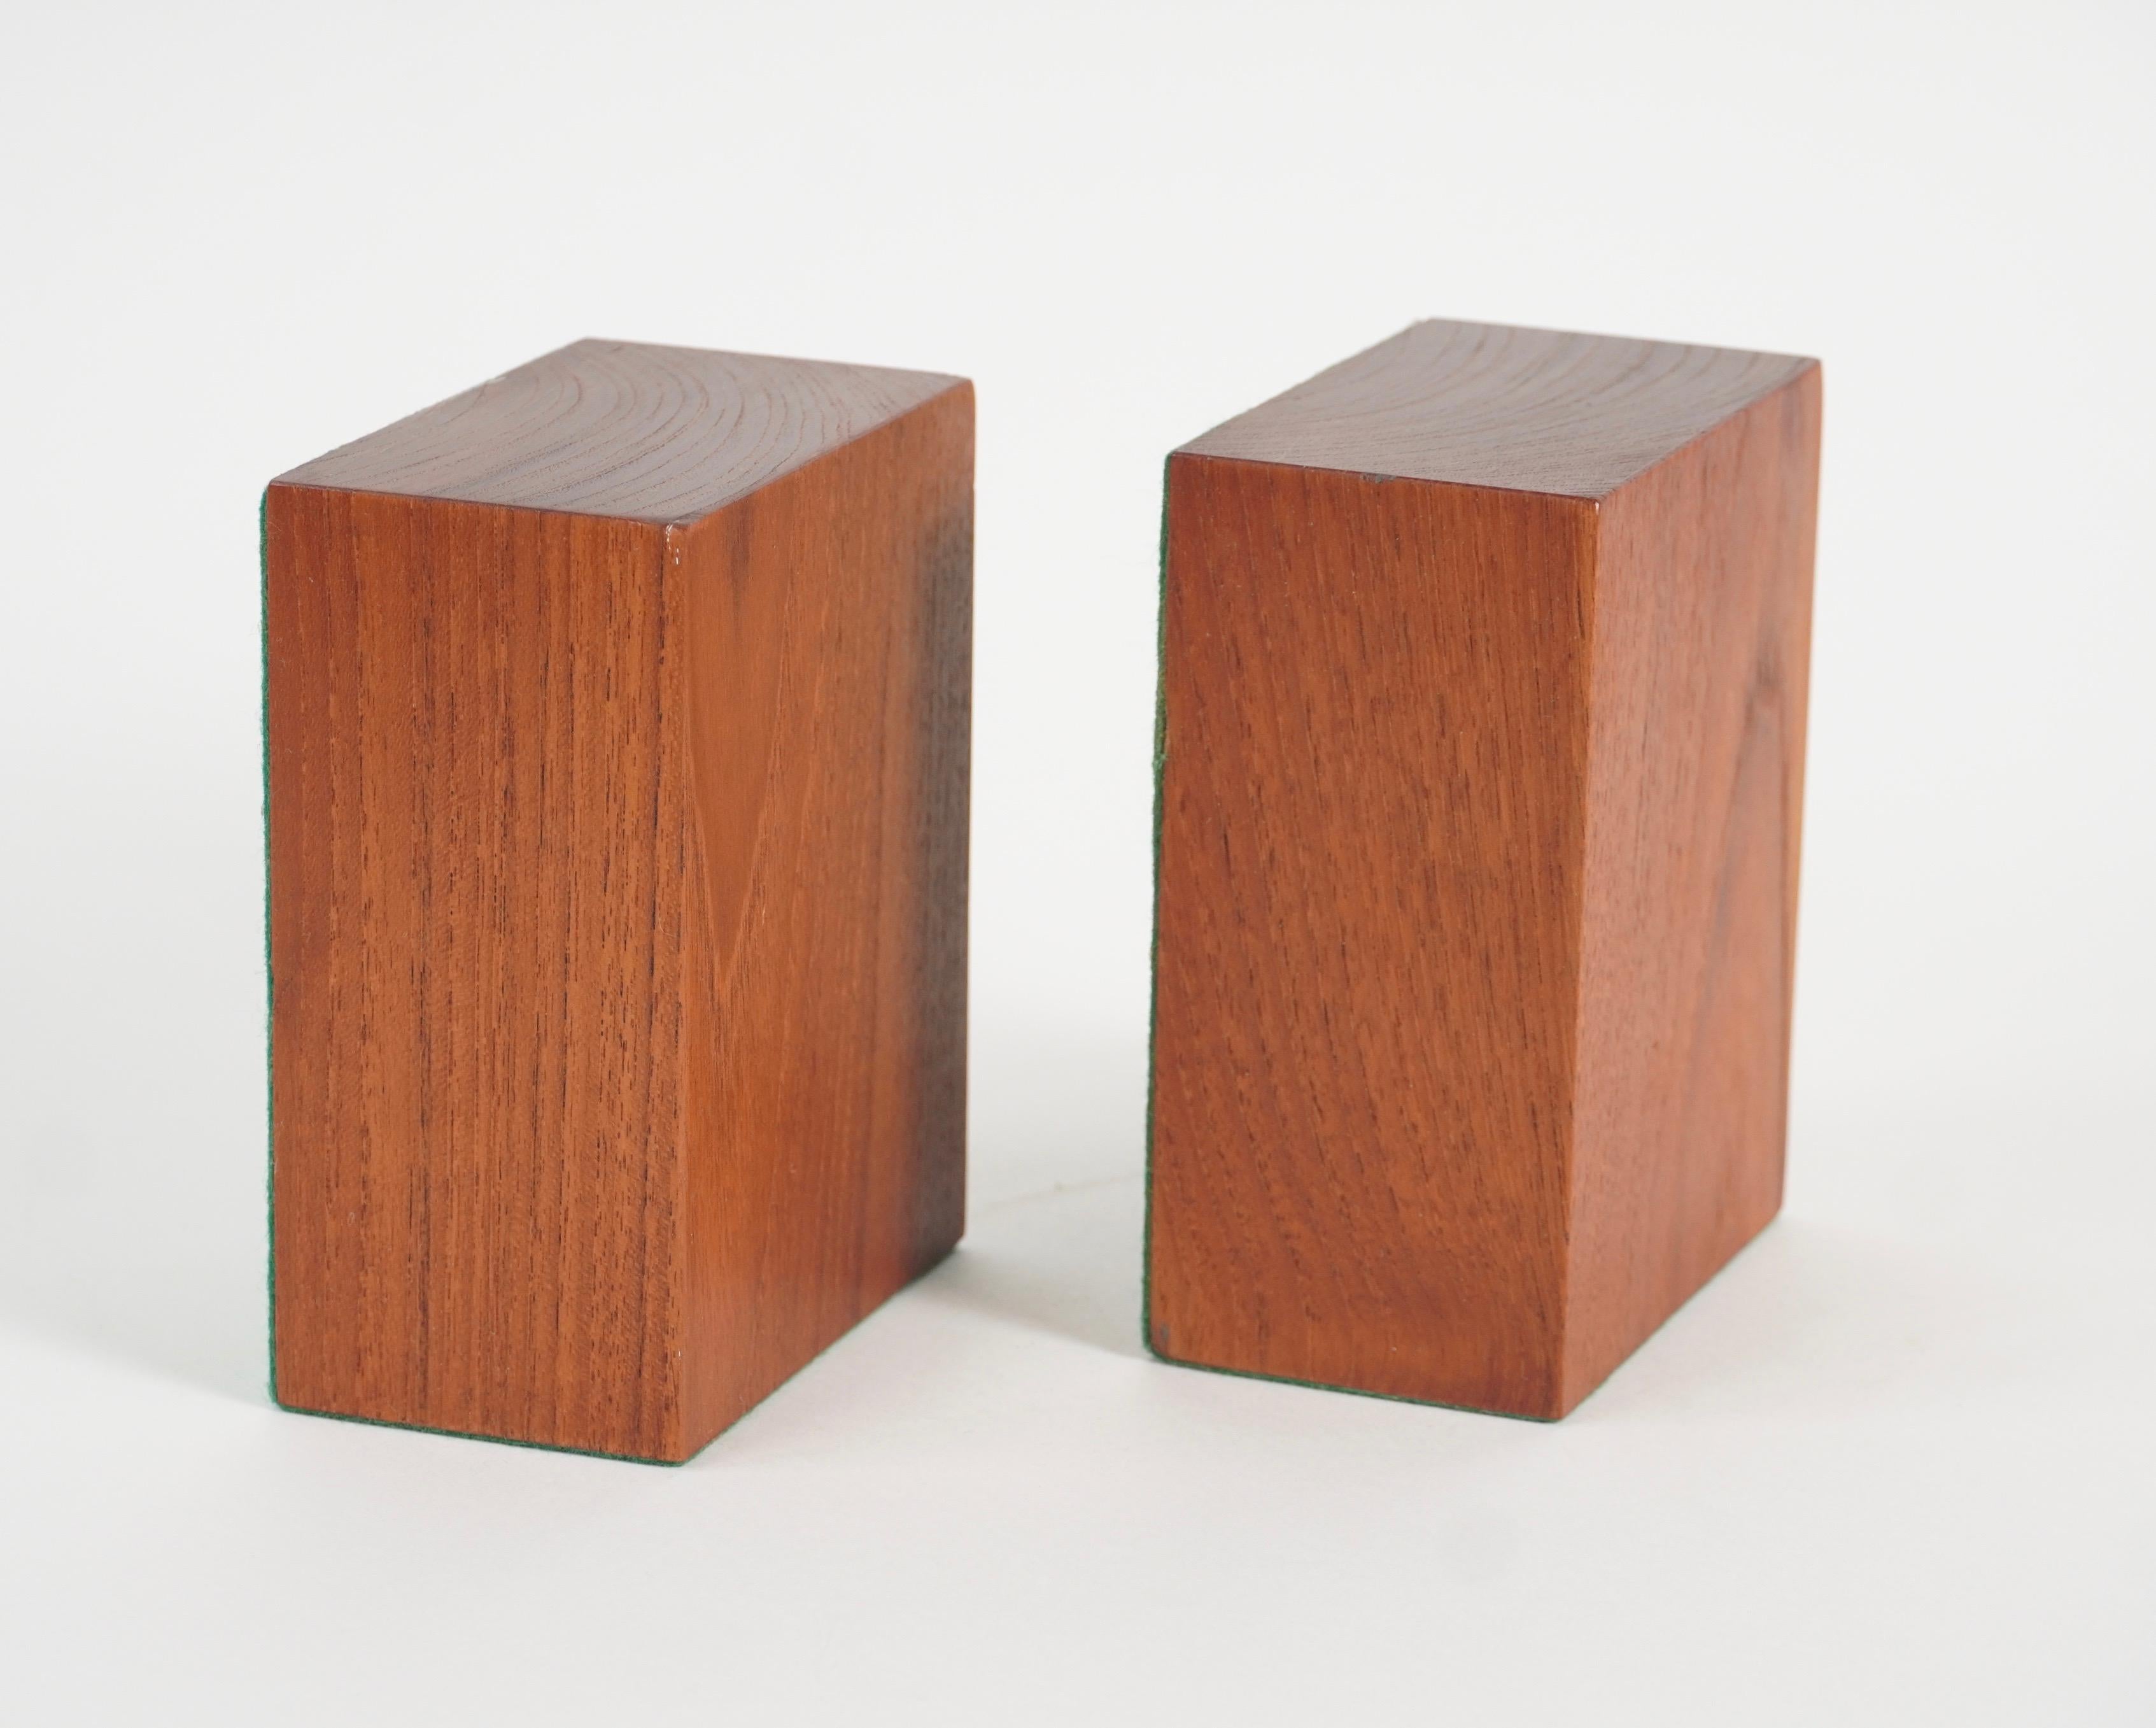 Hand-Crafted Bay Area Wood Worker Bob Stocksdale Studio Bookends